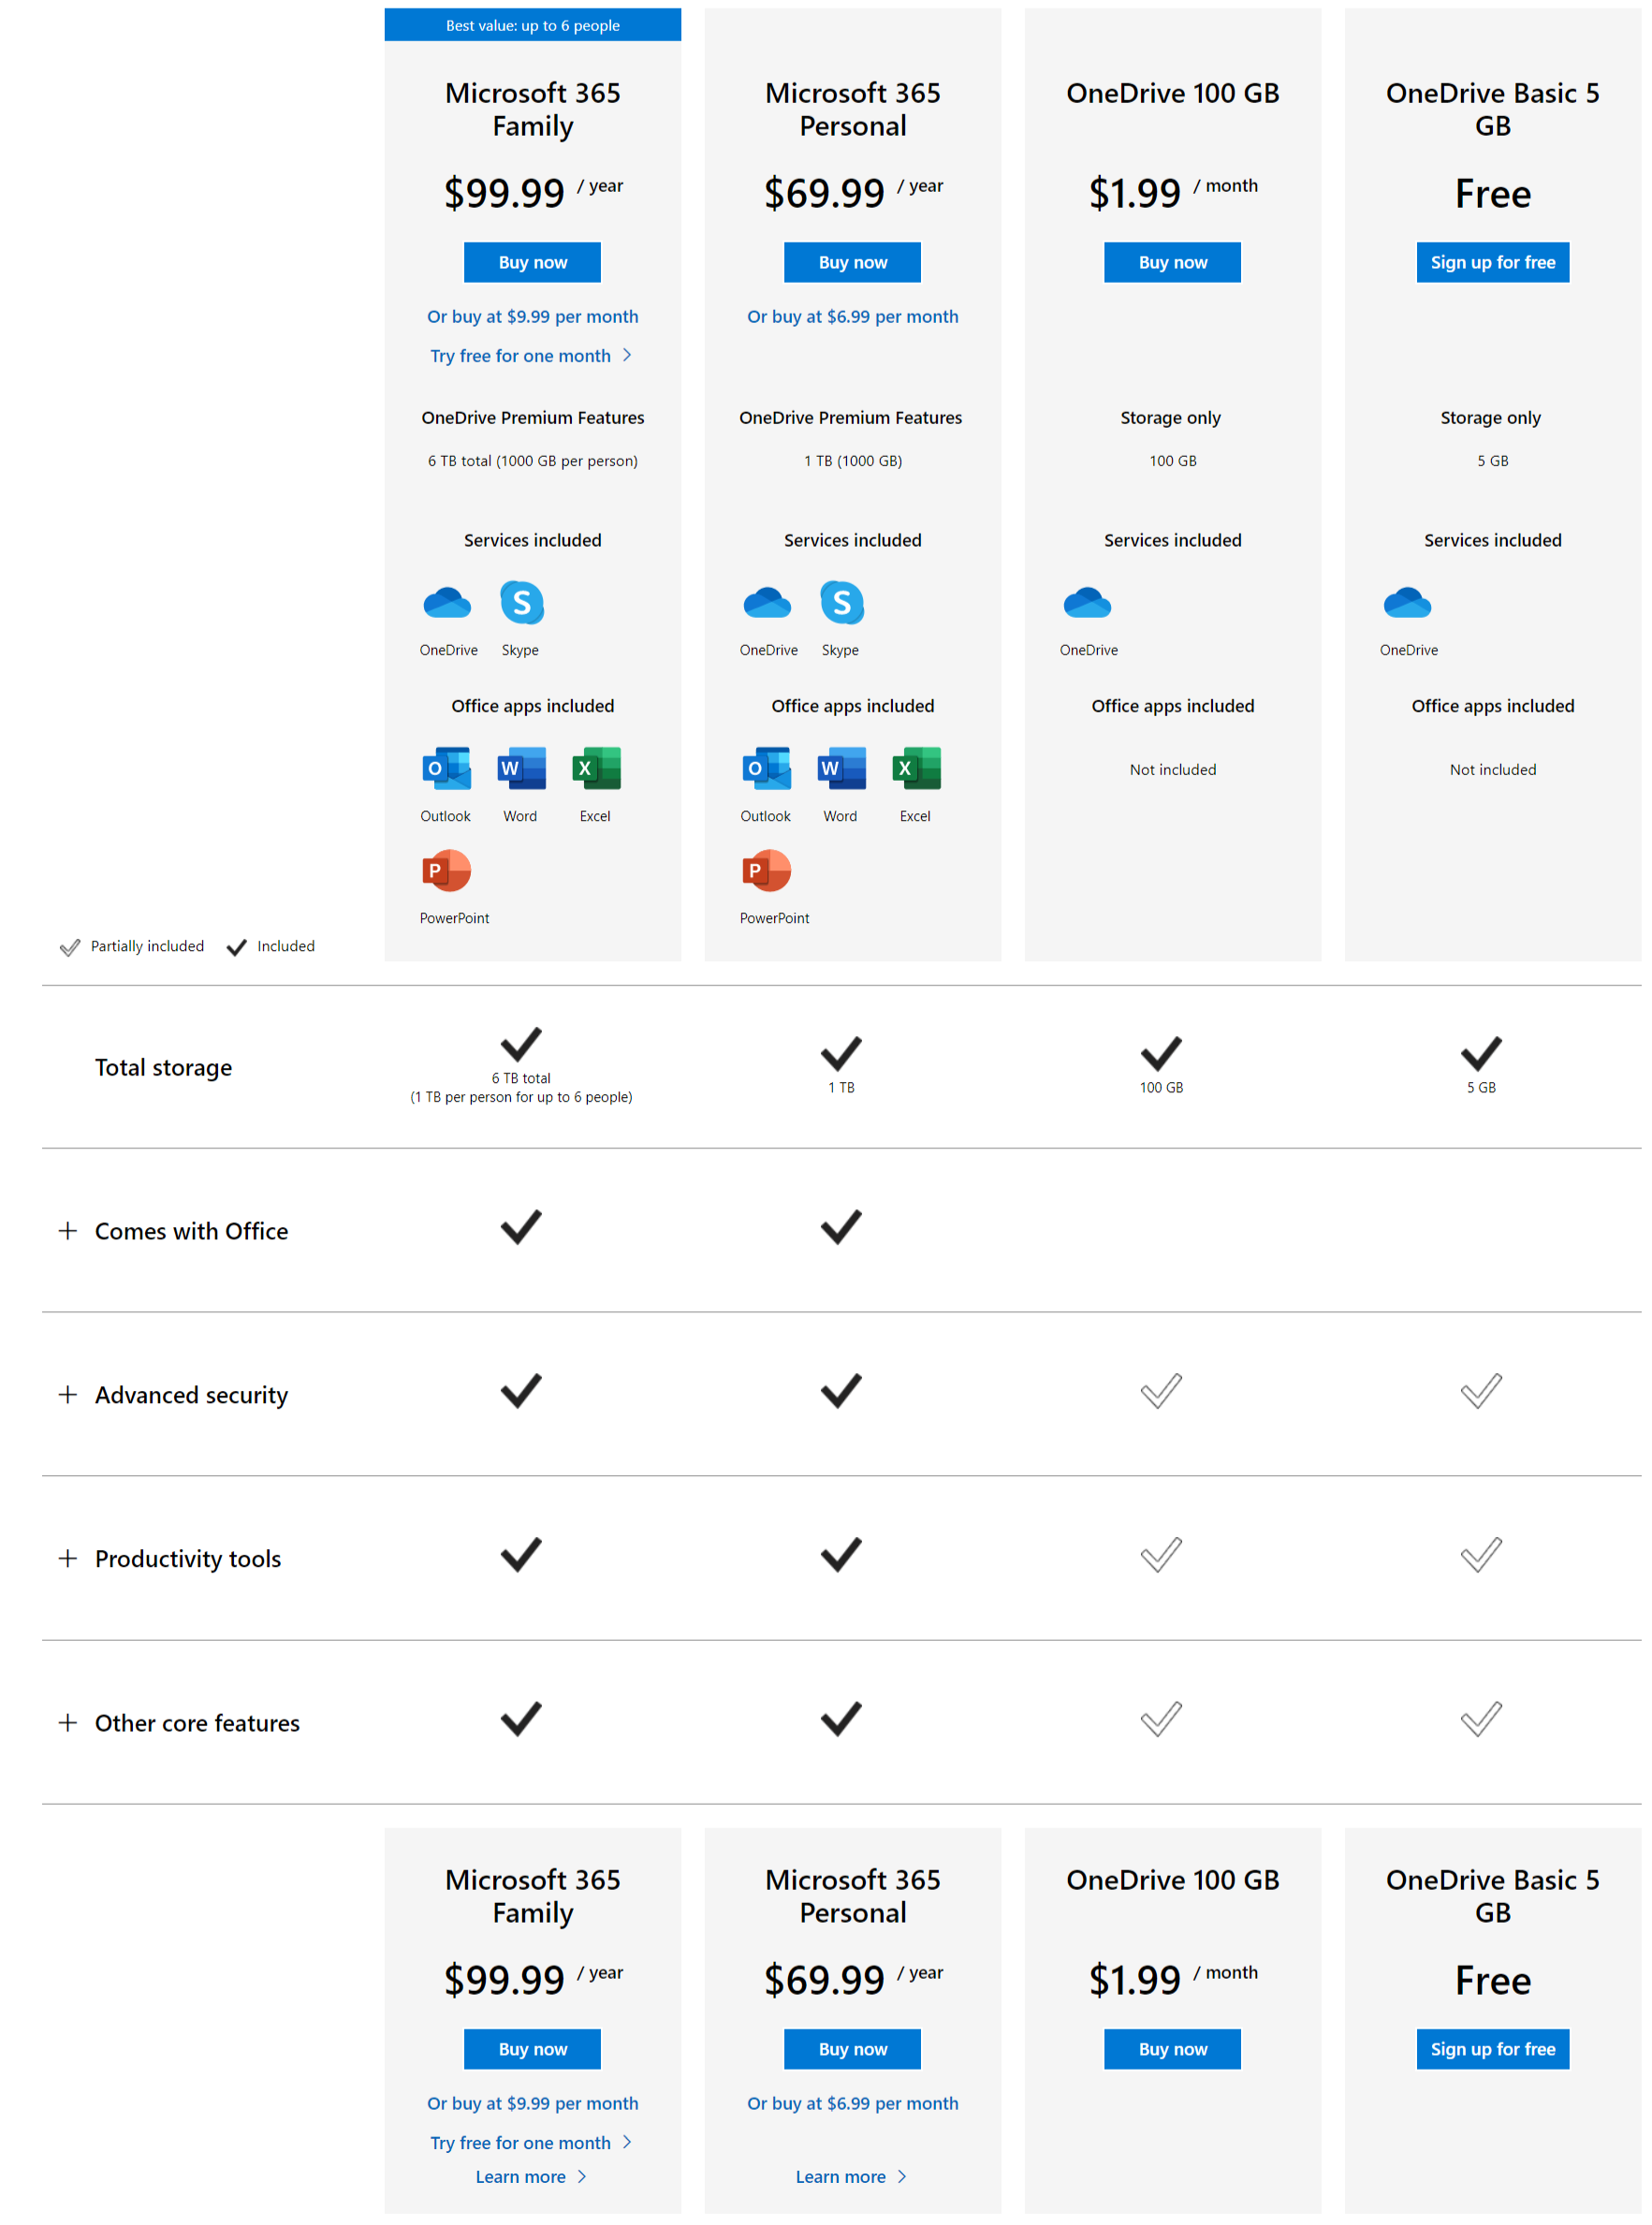 onedrive for business plan 2 cost